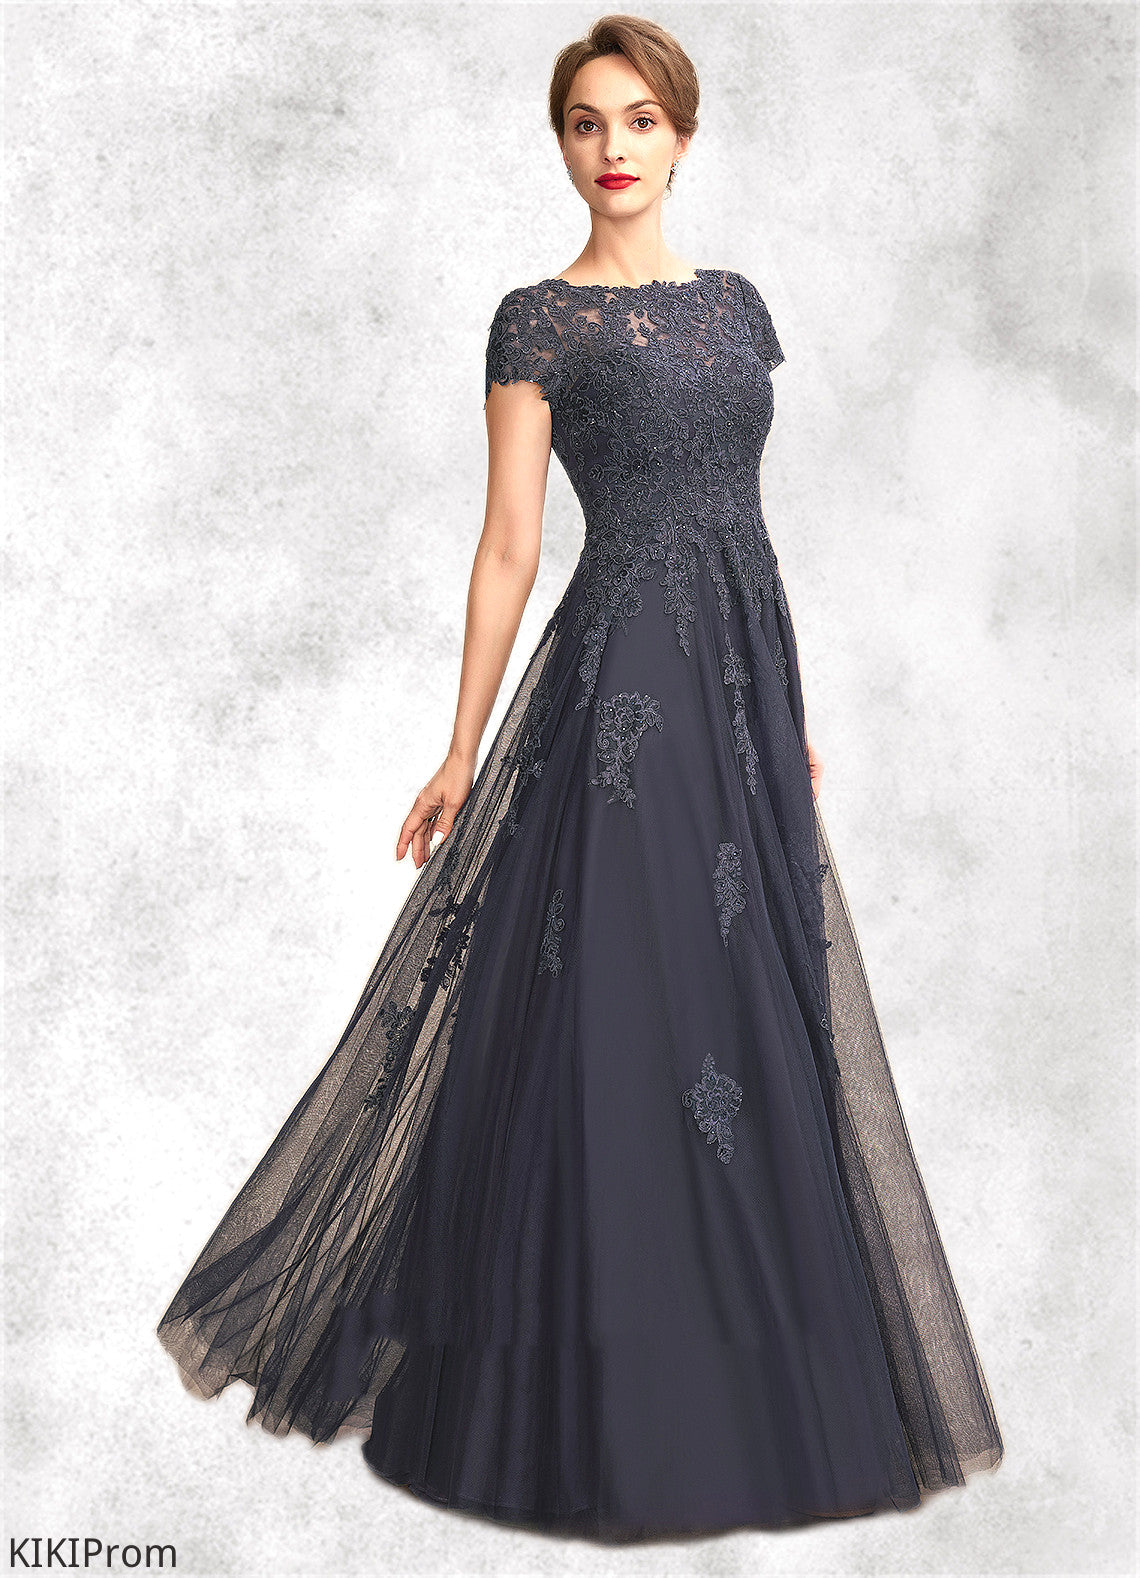 Eliza A-Line Scoop Neck Floor-Length Tulle Lace Mother of the Bride Dress With Beading DZ126P0015029